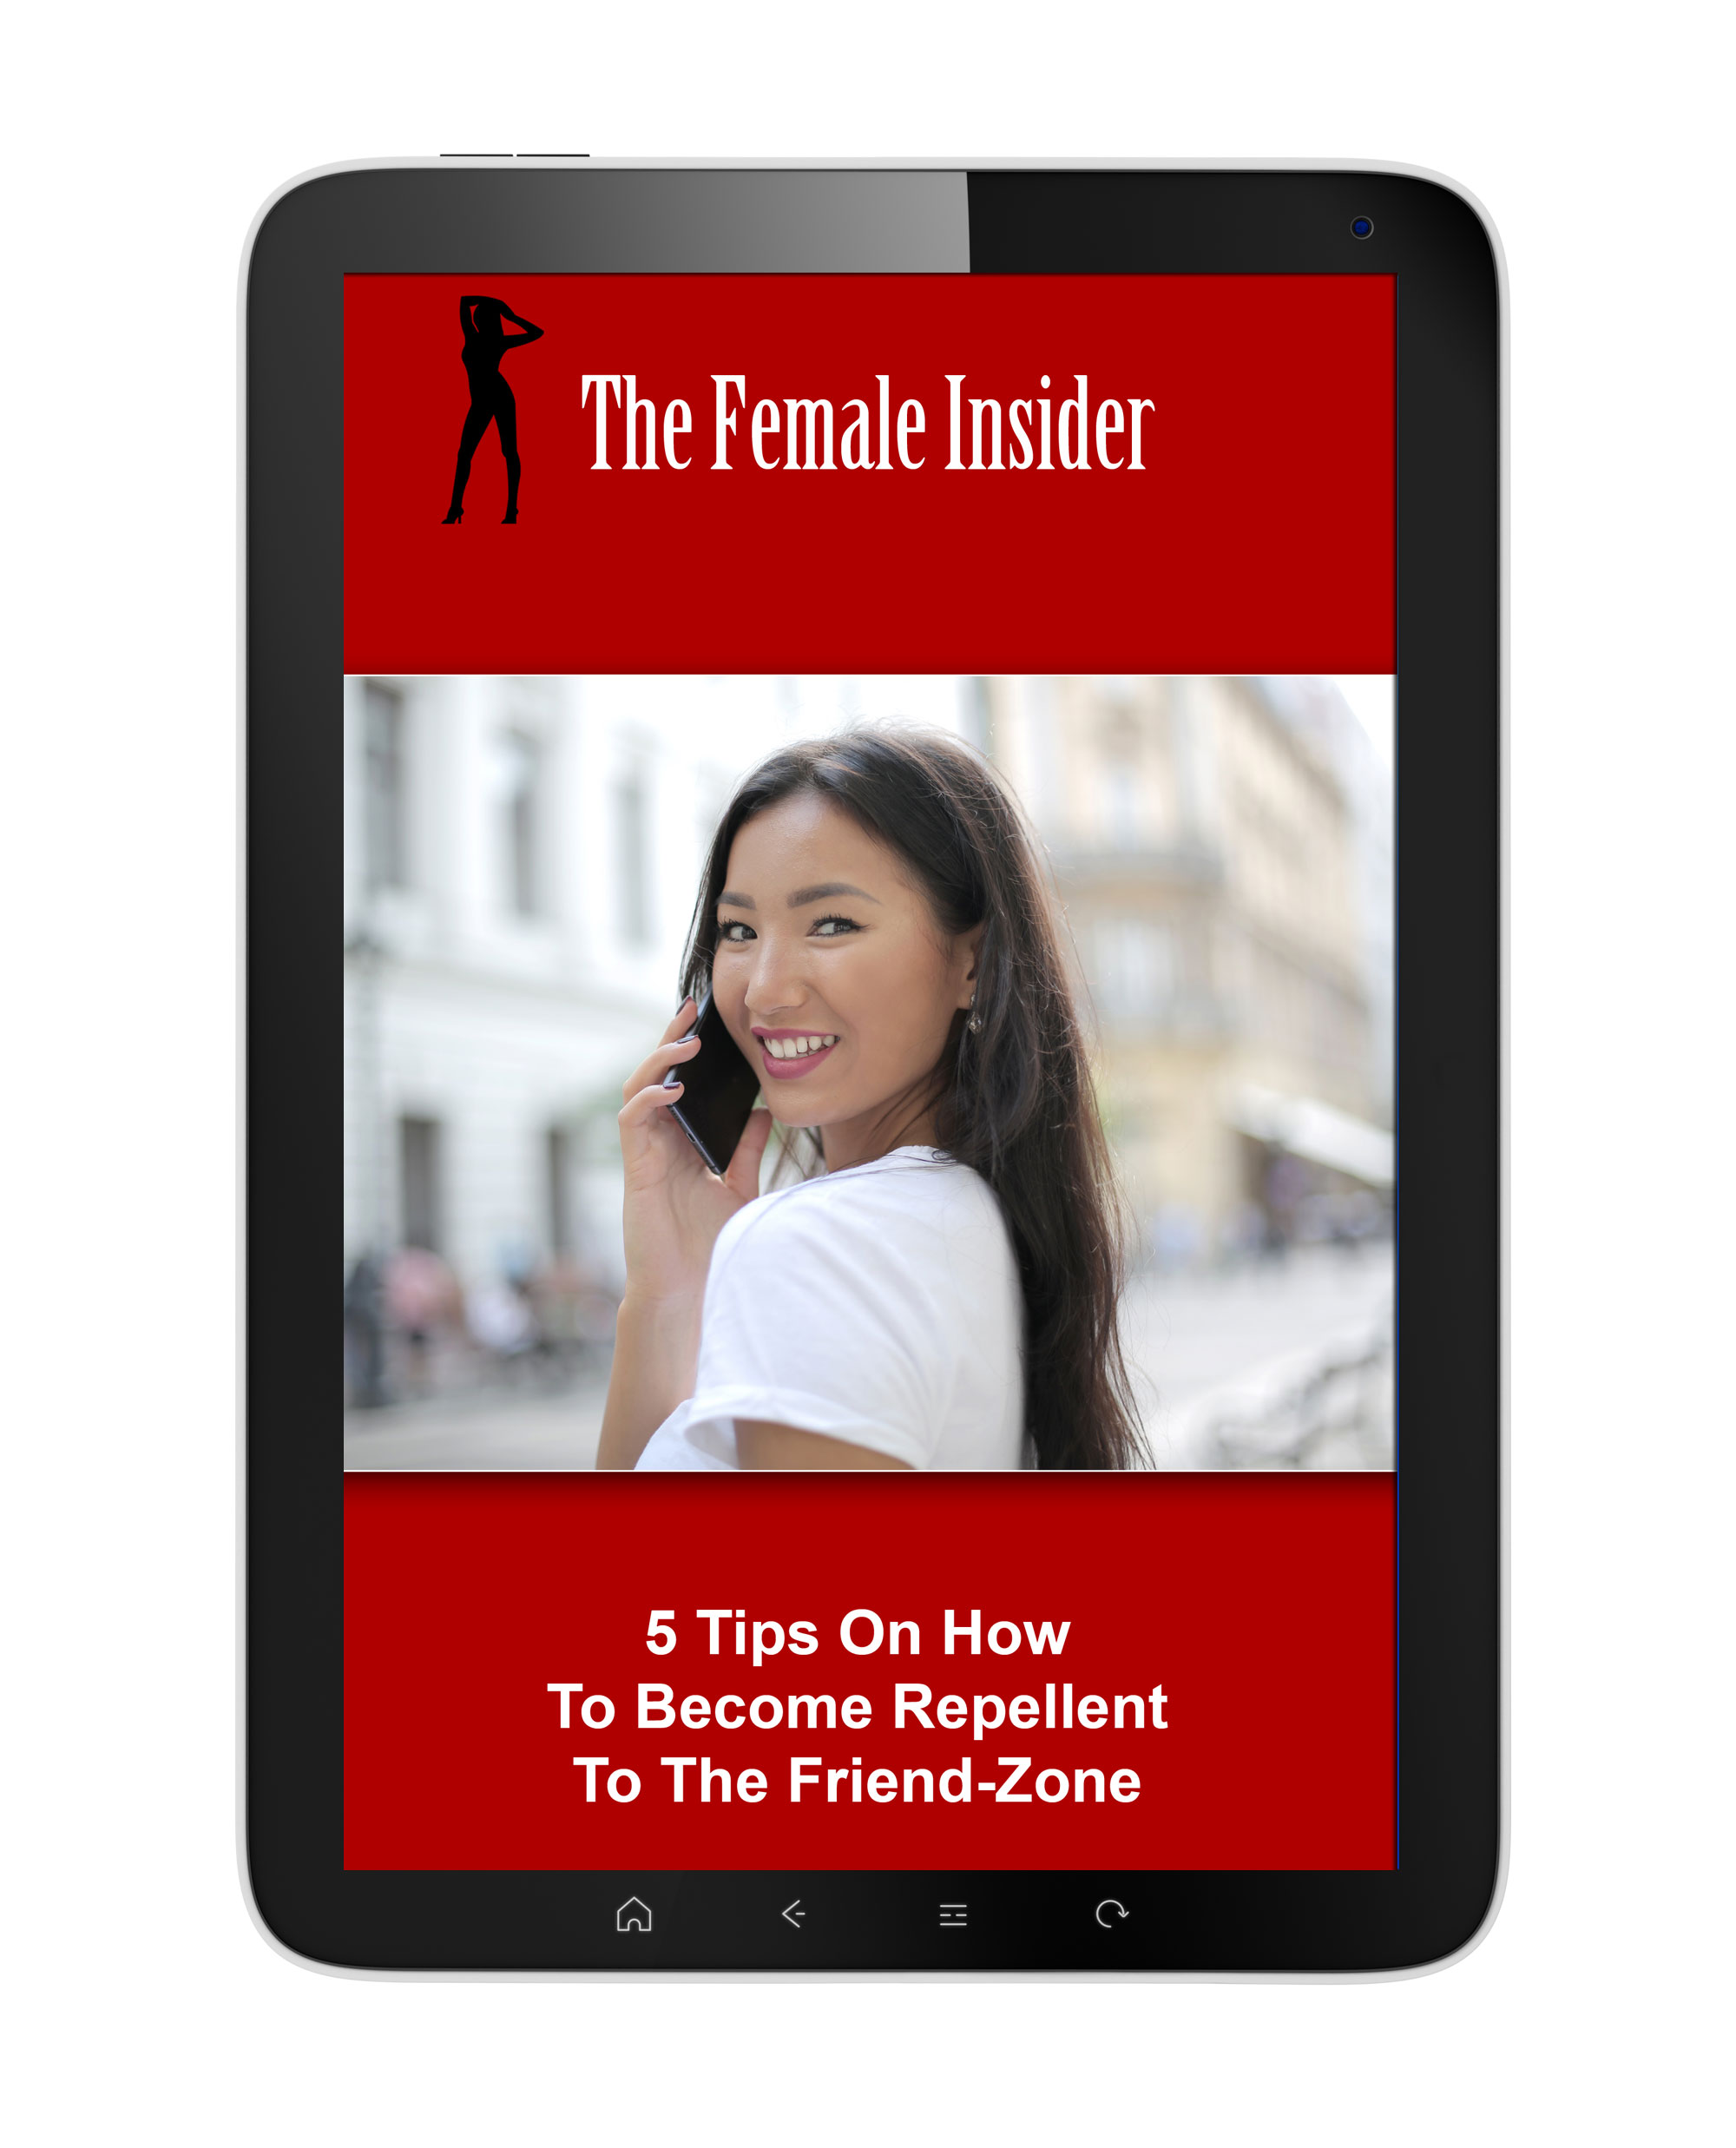 How To Tell If You're Friend-Zoned By Observing Her Body Language